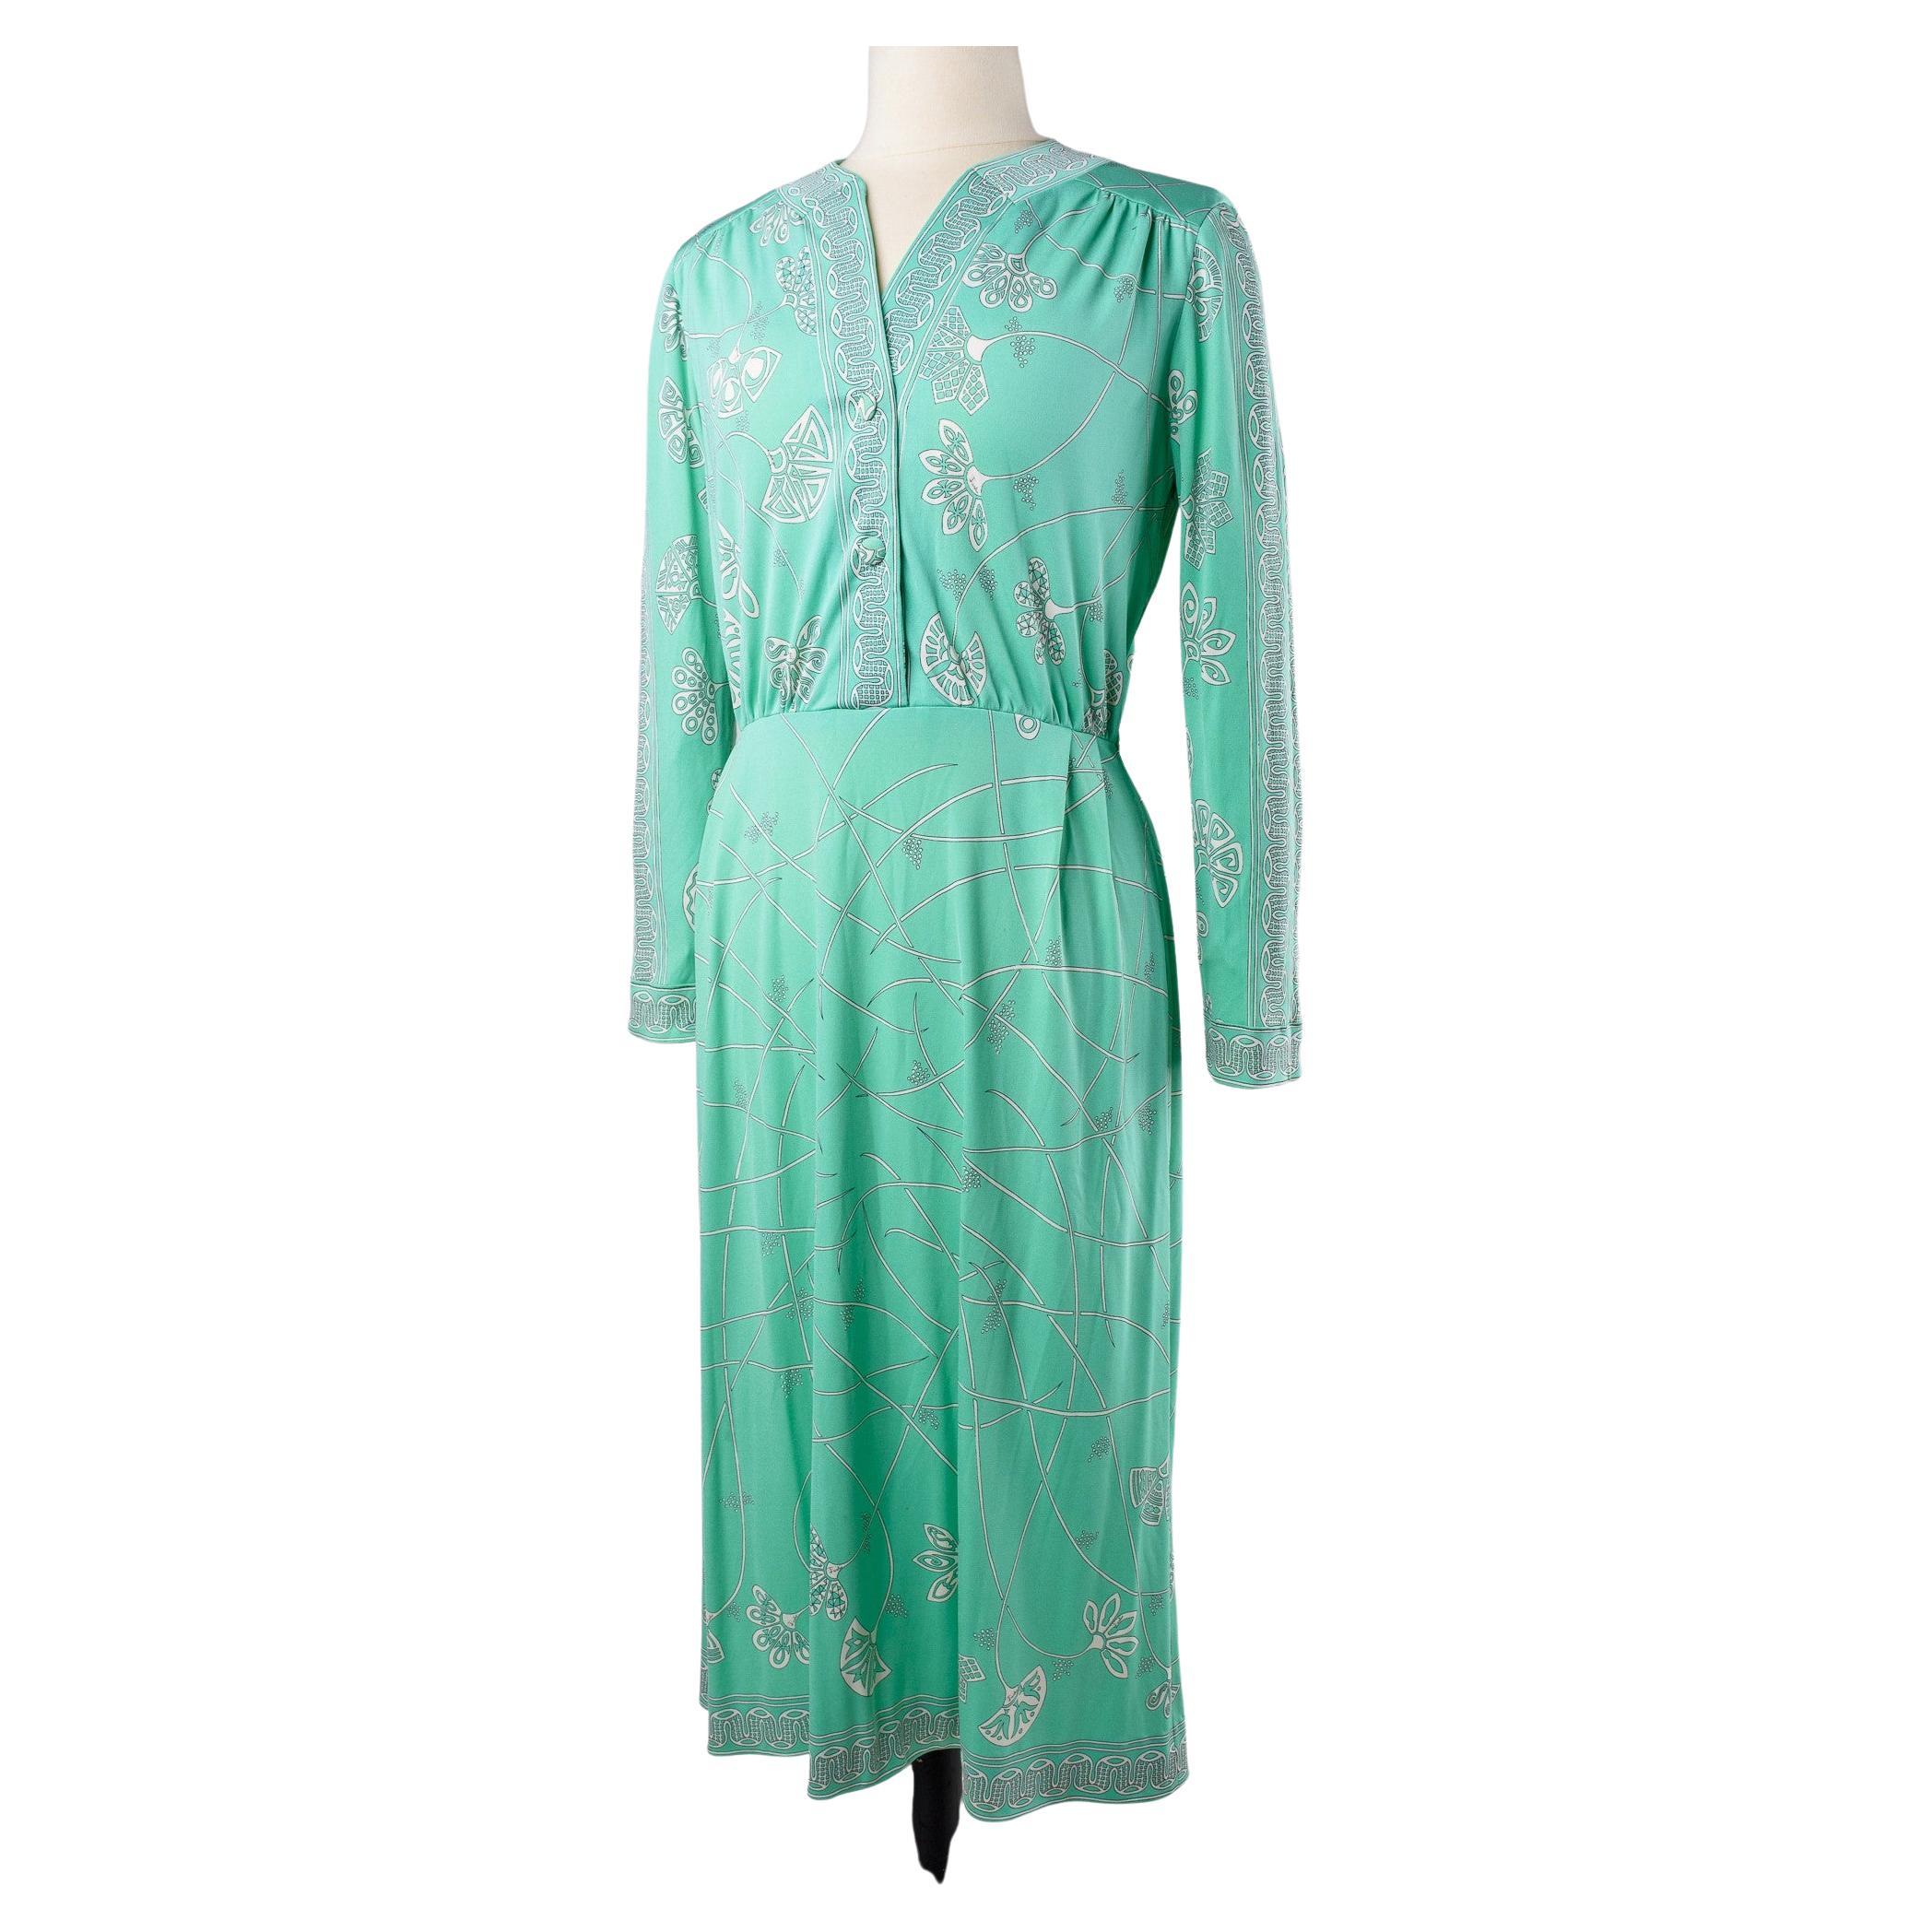 A light green printed silk jersey dress by Emilio Pucci - Italy Circa 1980